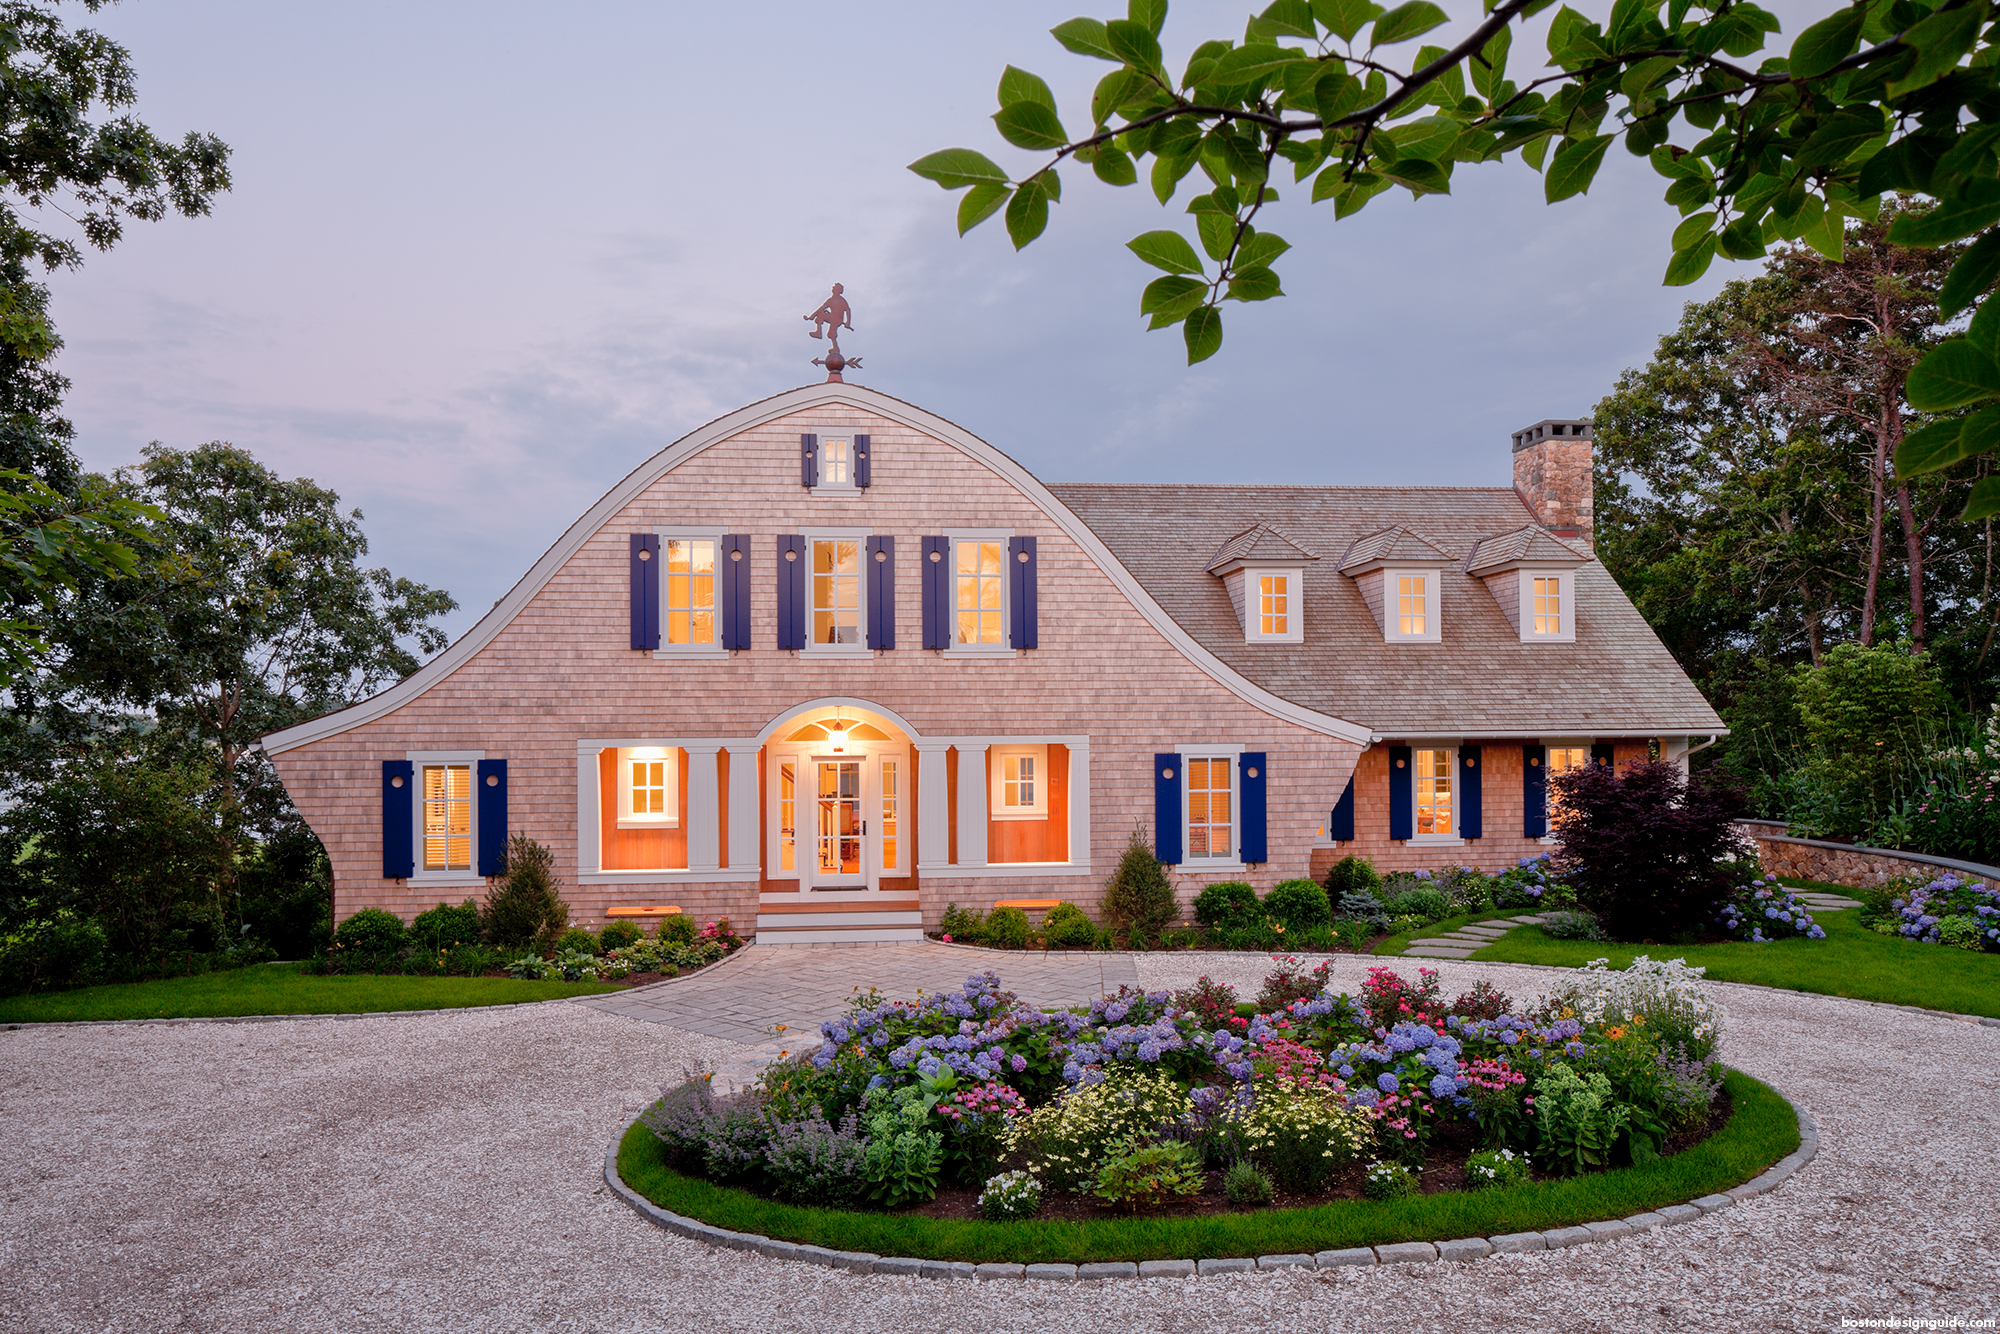 Shingle Style Home in Chatham